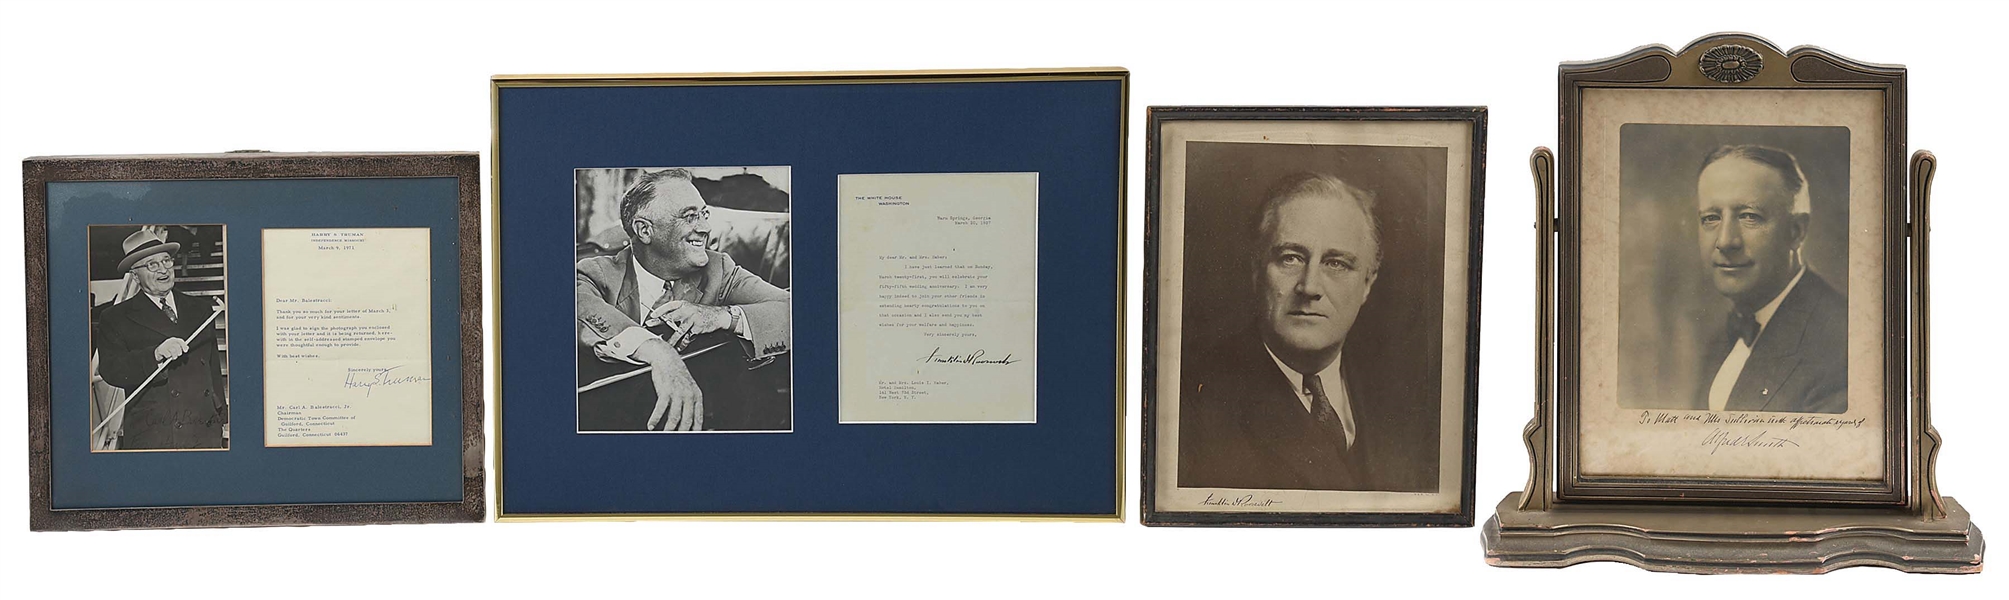 LOT OF 4 FRAMED SIGNATURES: 2 FRANKLIN ROOSEVELT SIGNATURES 1 HARRY TRUMAN LETTER AND 1 ALFRED SMITH SIGNATURE.